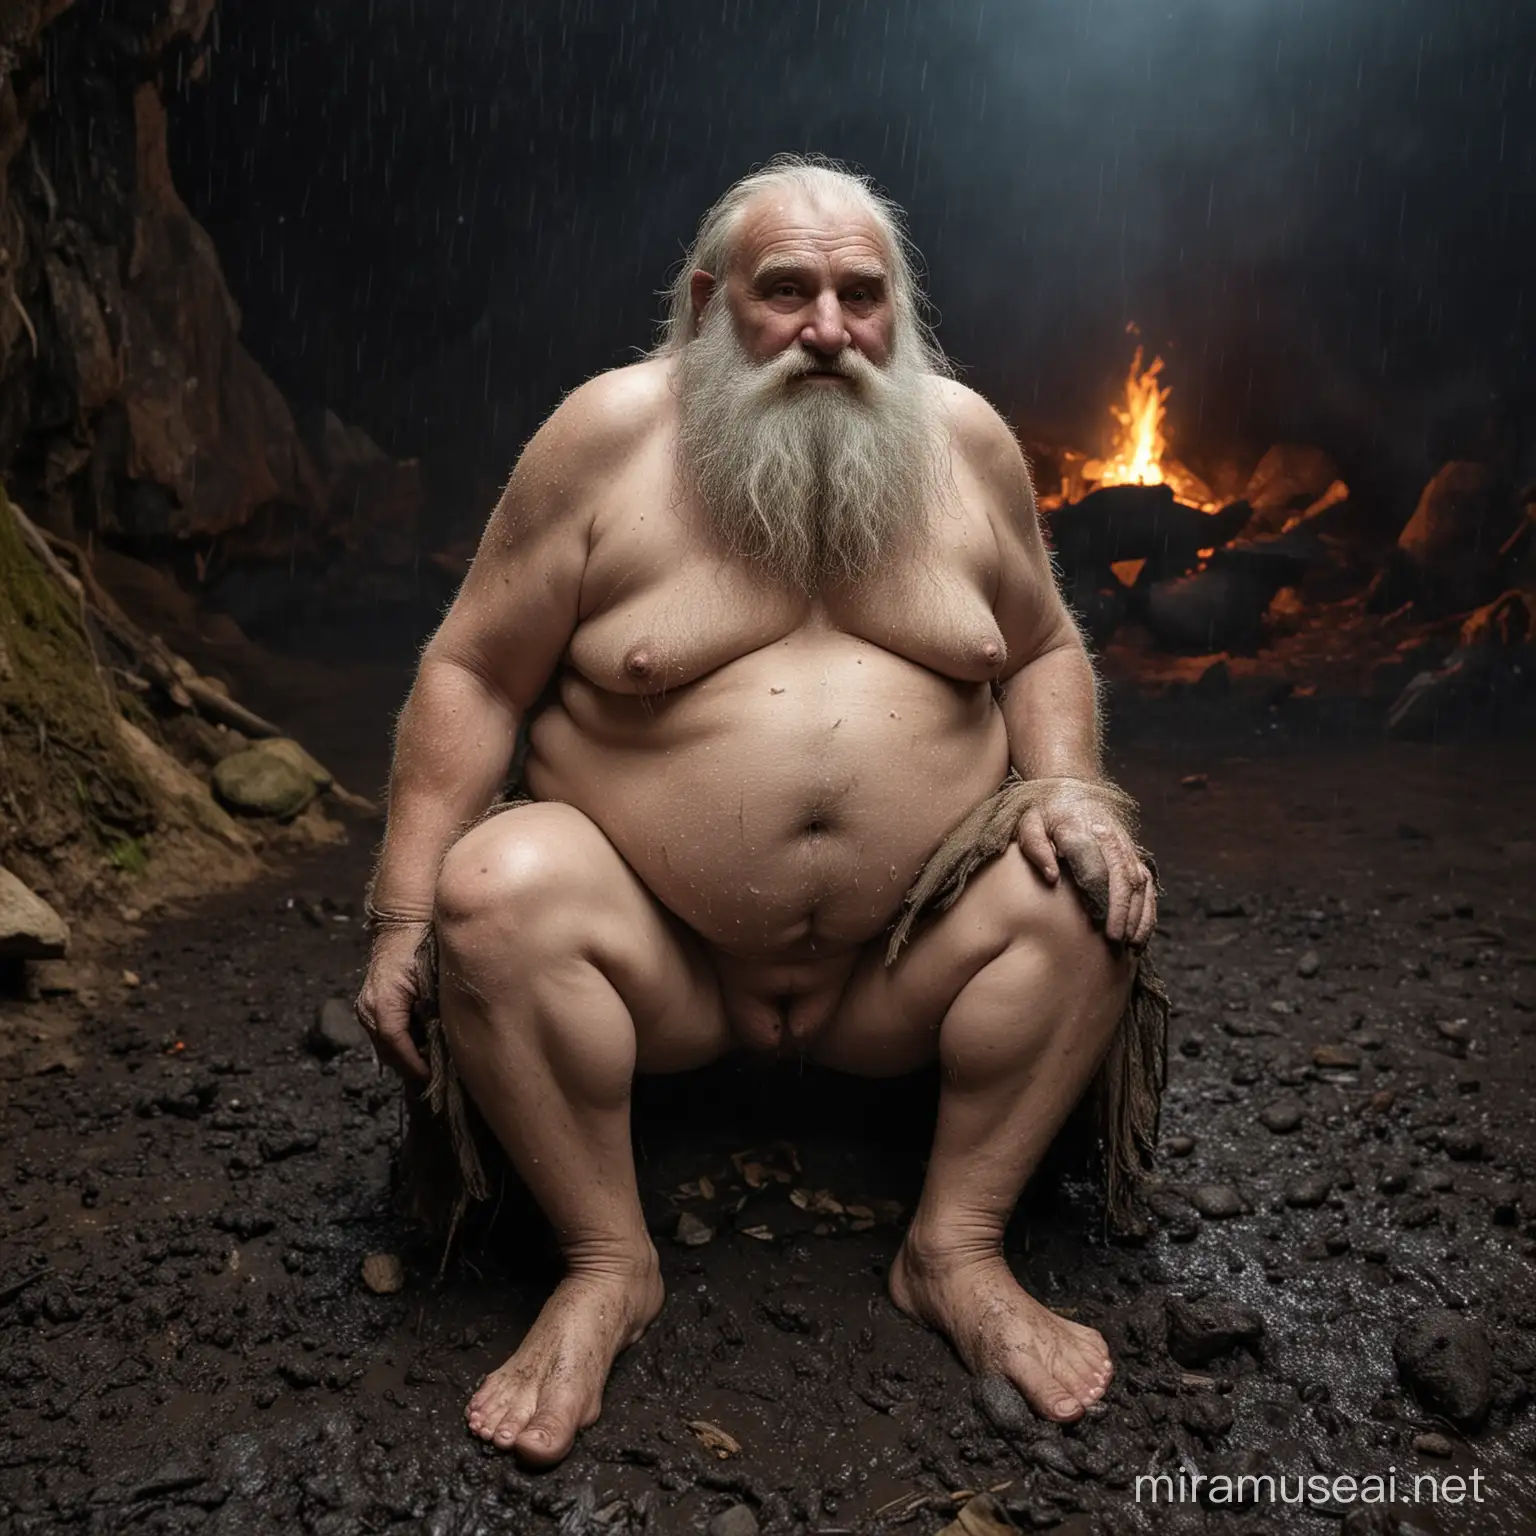 troll,forest cave,at midnight,bonfire,large feet,naked,loincloth,dumpy,chubby,primitive,hairy,long beard,old age,sitting on the ground,rainy,wet dirty black mud on body